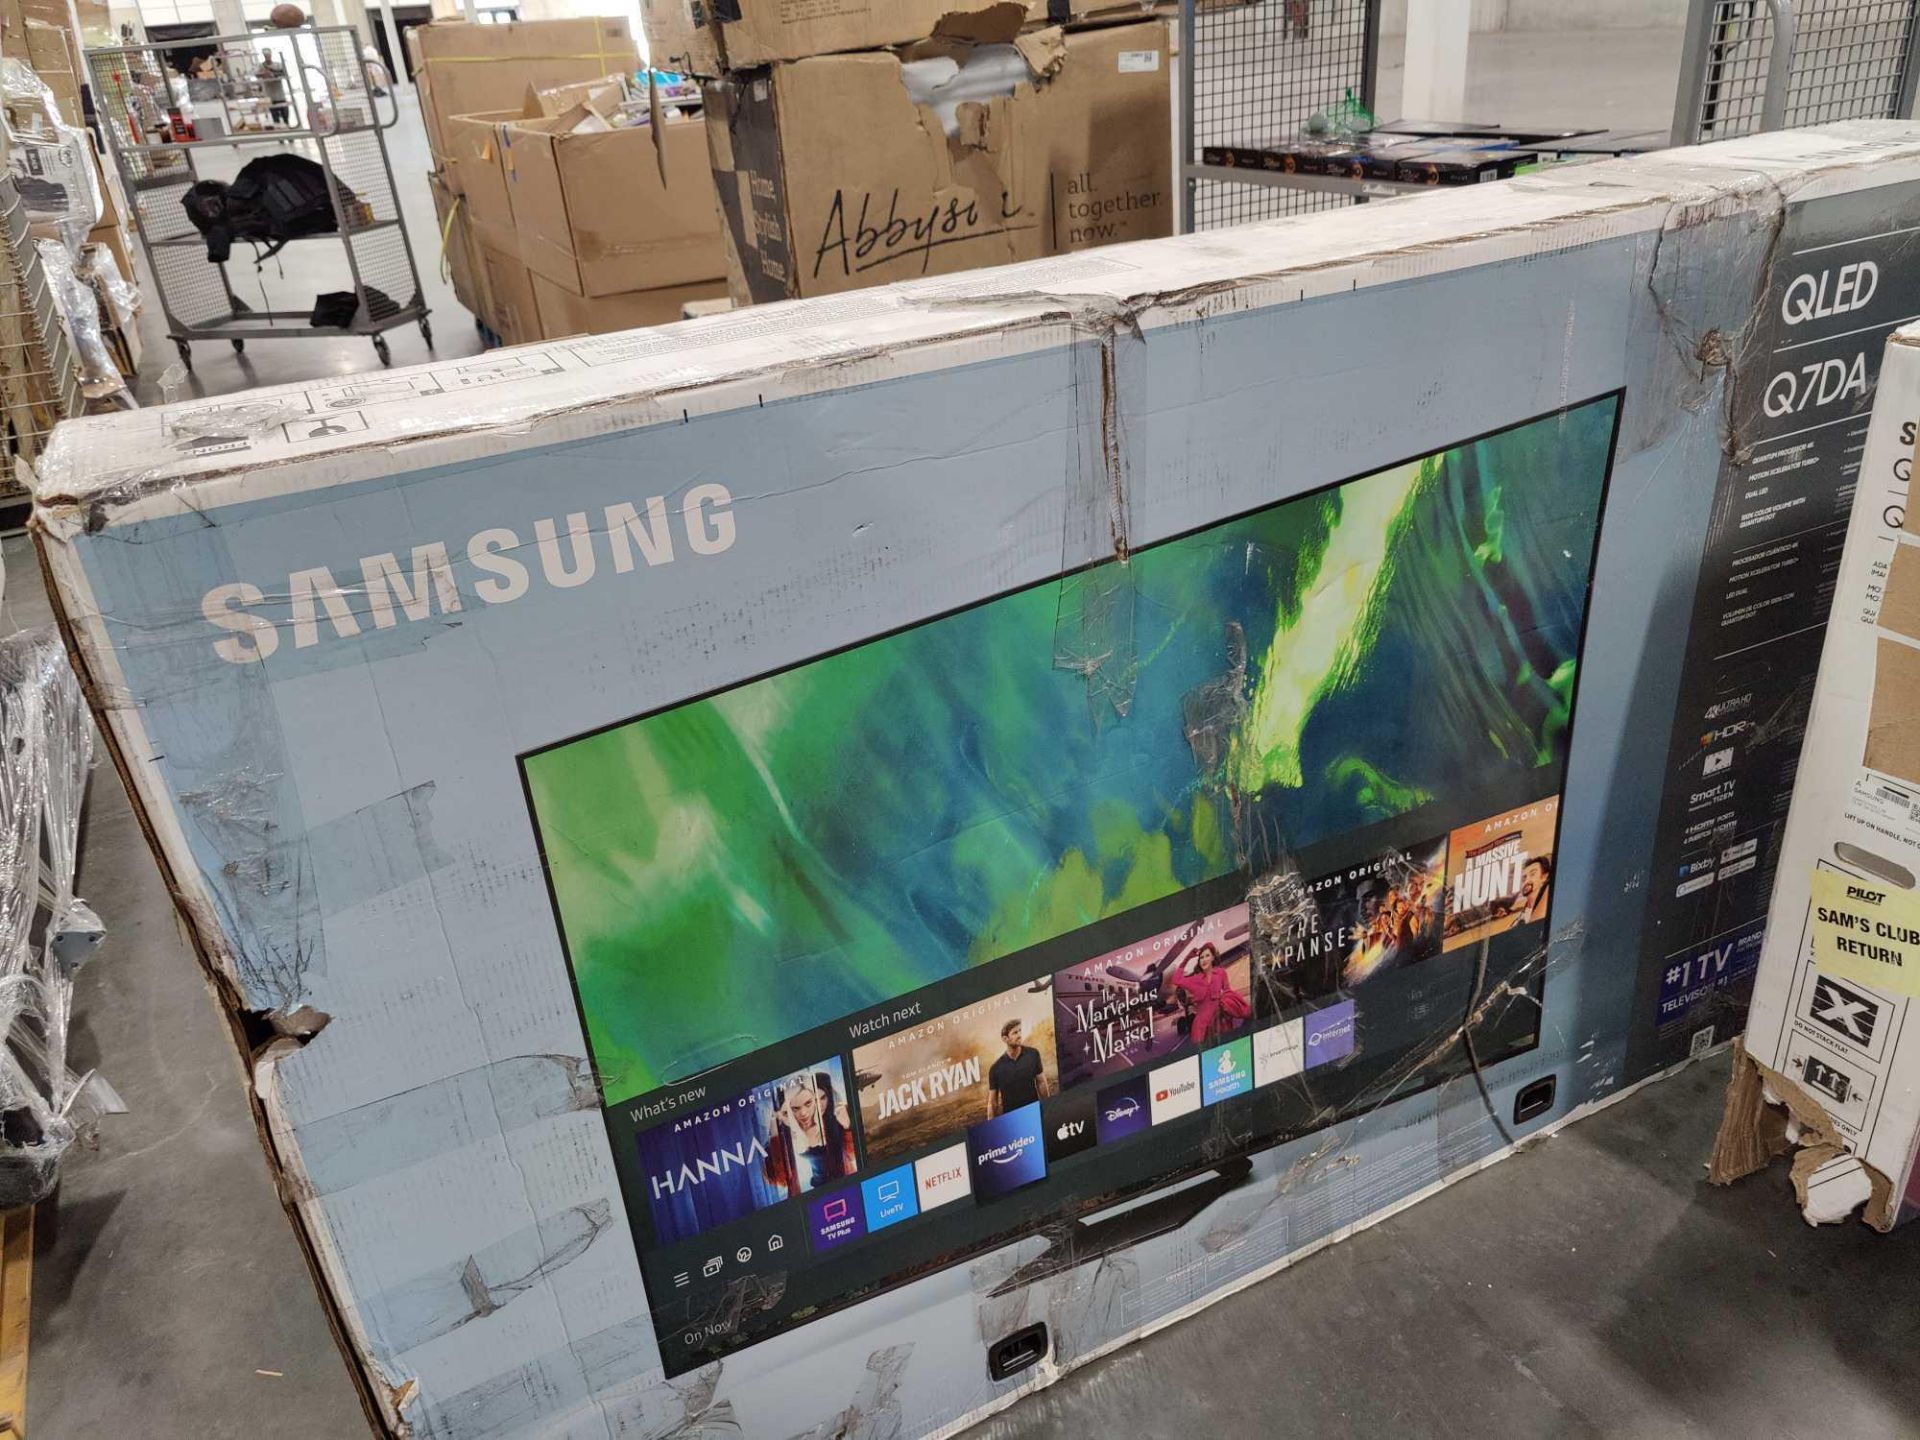 Samsung QLED Q7DA 85" (Section of TV's located near the stage) - Image 2 of 3